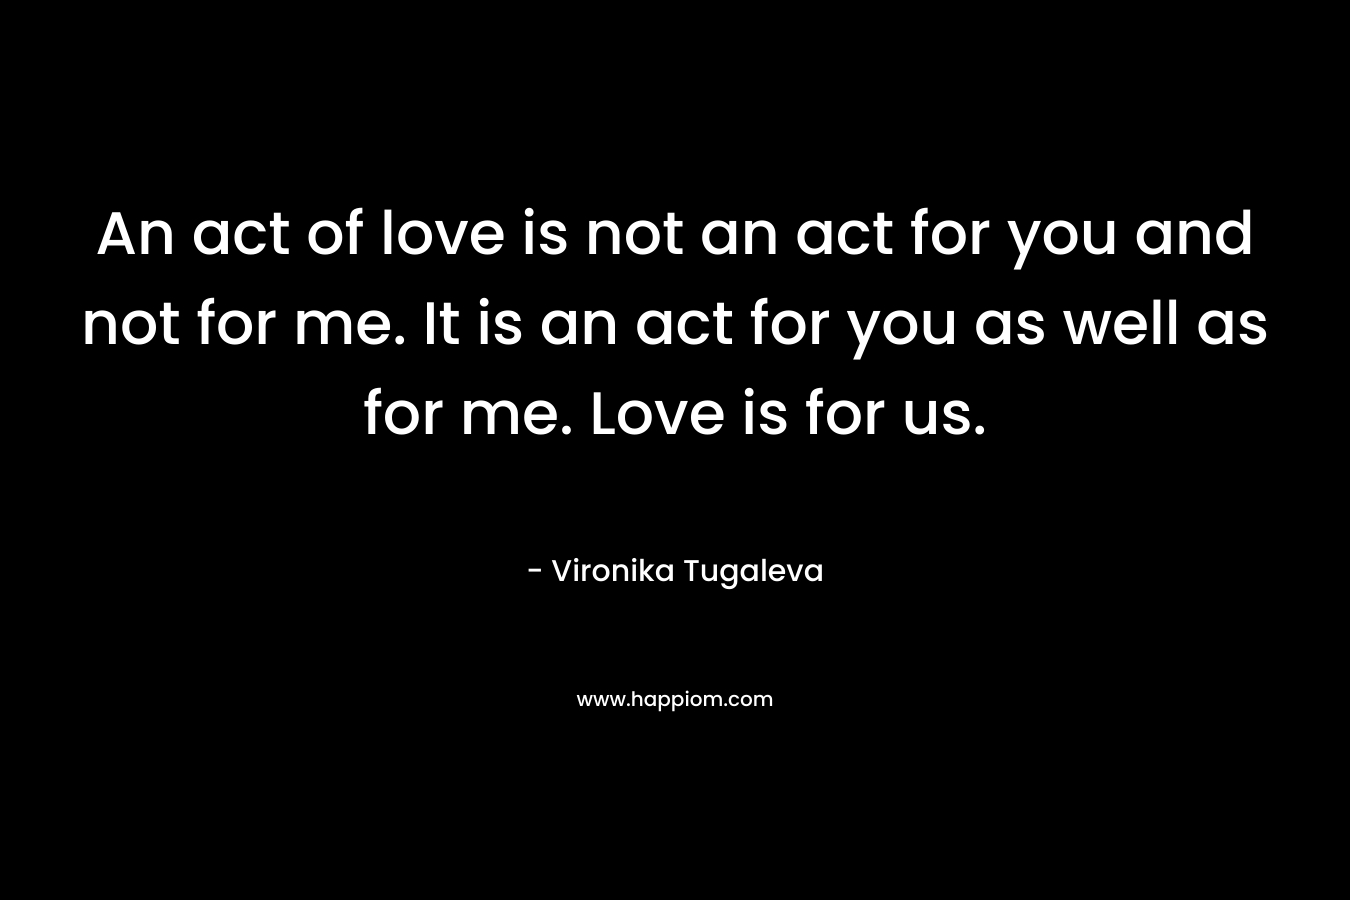 An act of love is not an act for you and not for me. It is an act for you as well as for me. Love is for us.